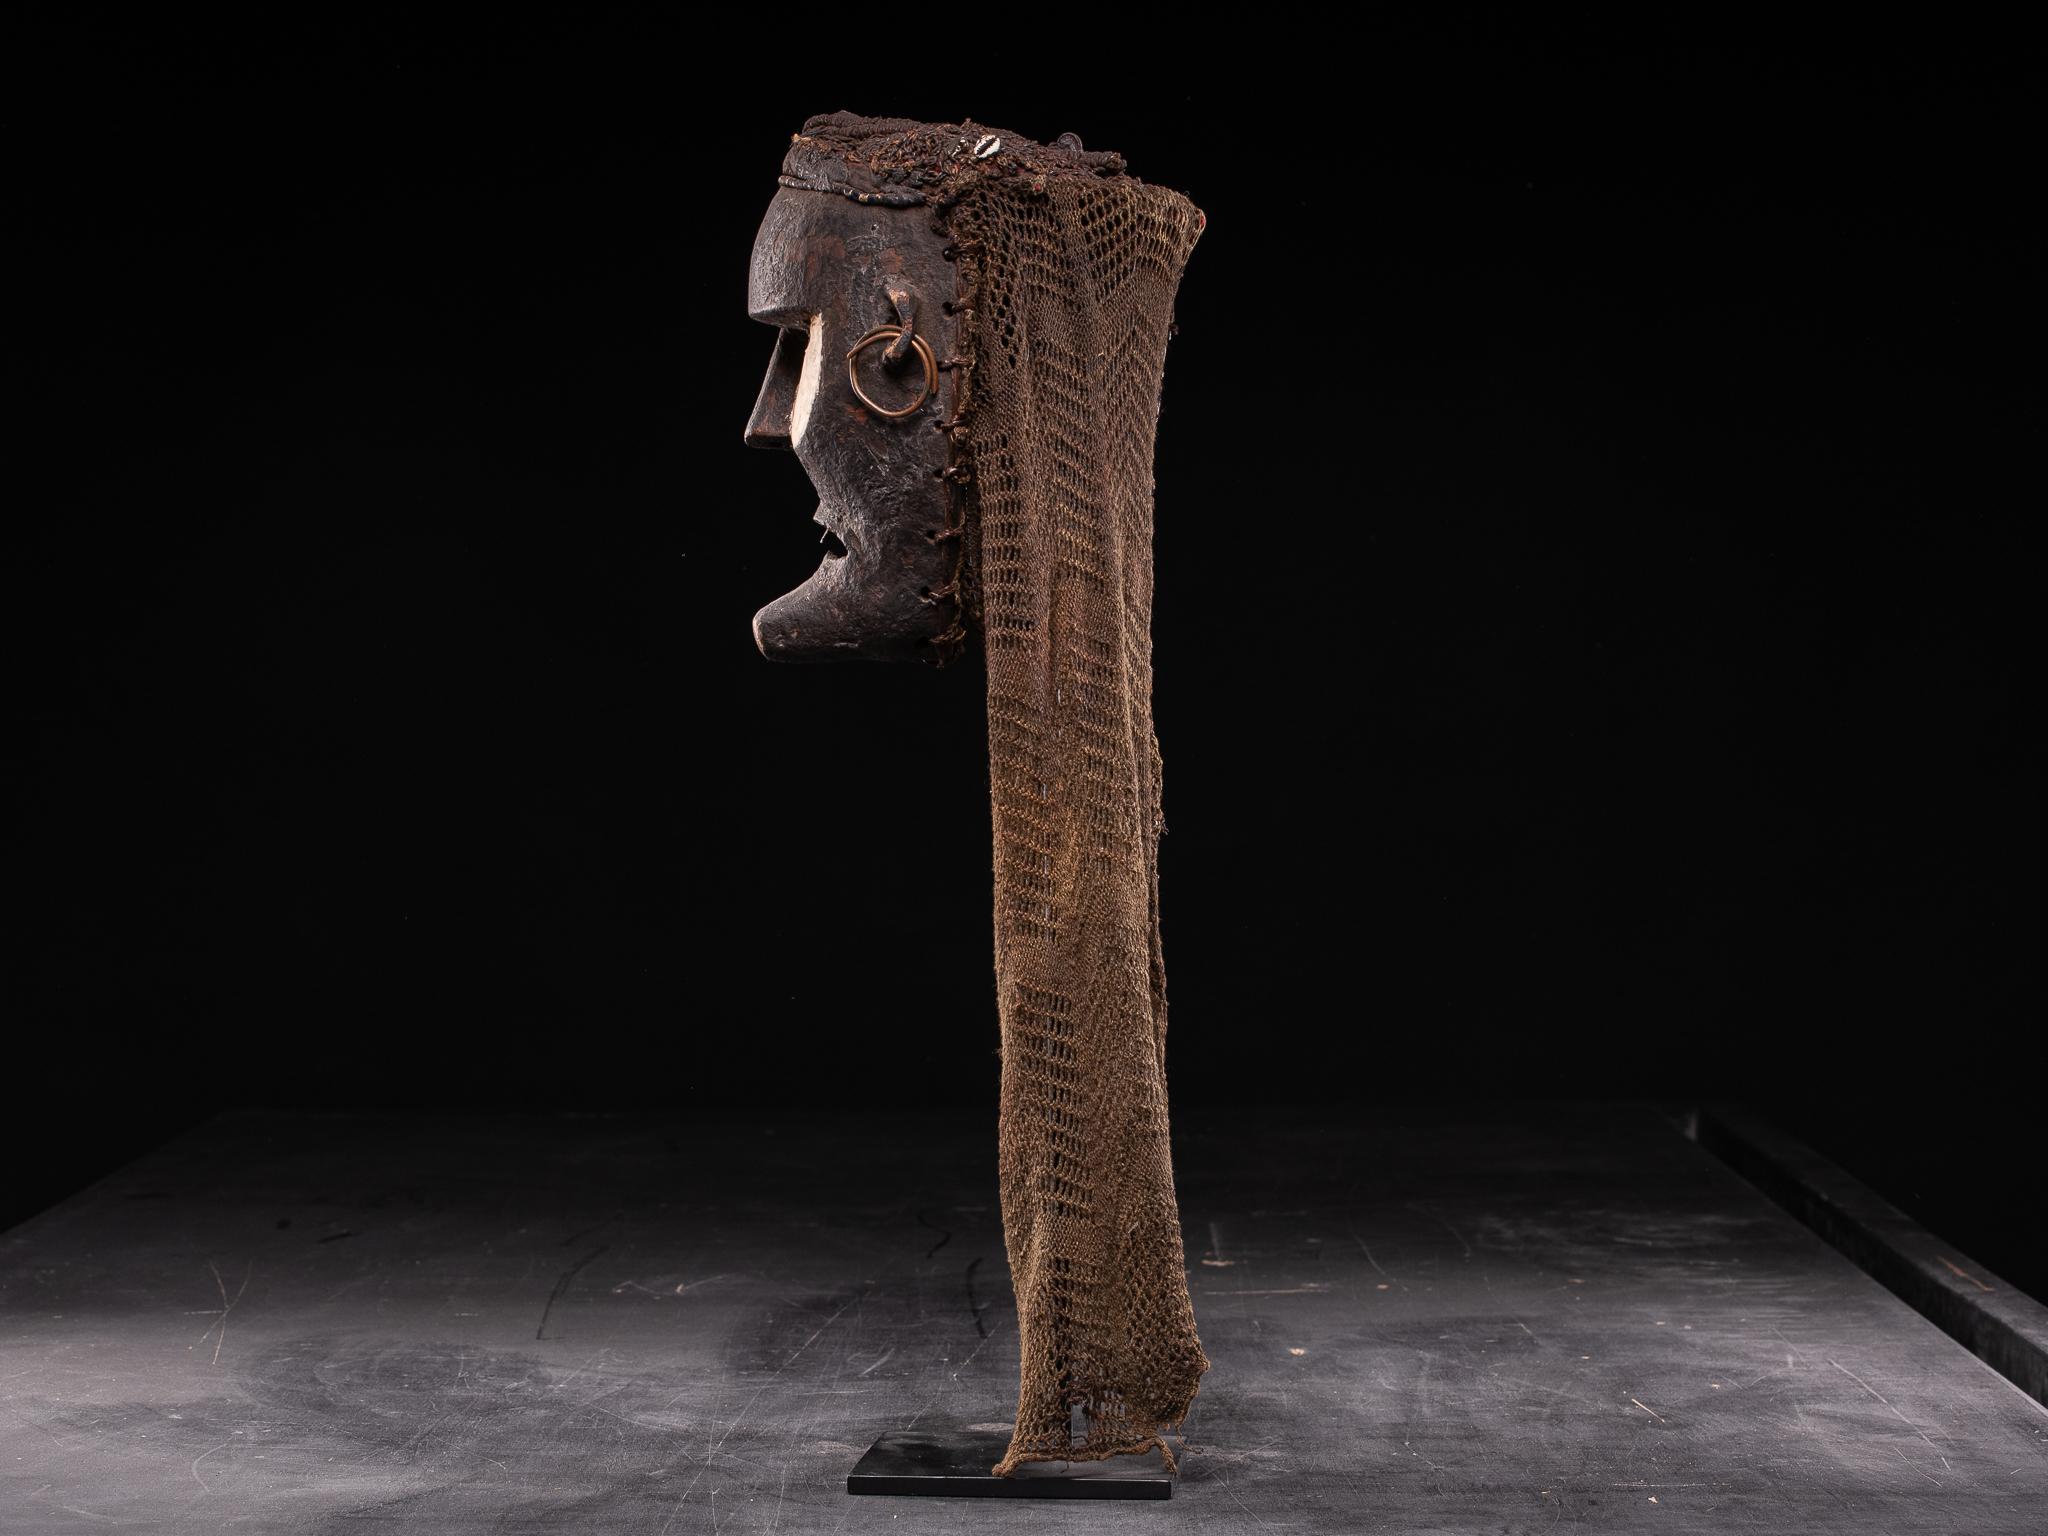 This unusual Chokwe mask is probably of the Katoyo type, representing non-Chokwe individuals. The deviation of the mask from the more common Chokwe masks is due largely to the fact that they represent Portuguese or European features: a long